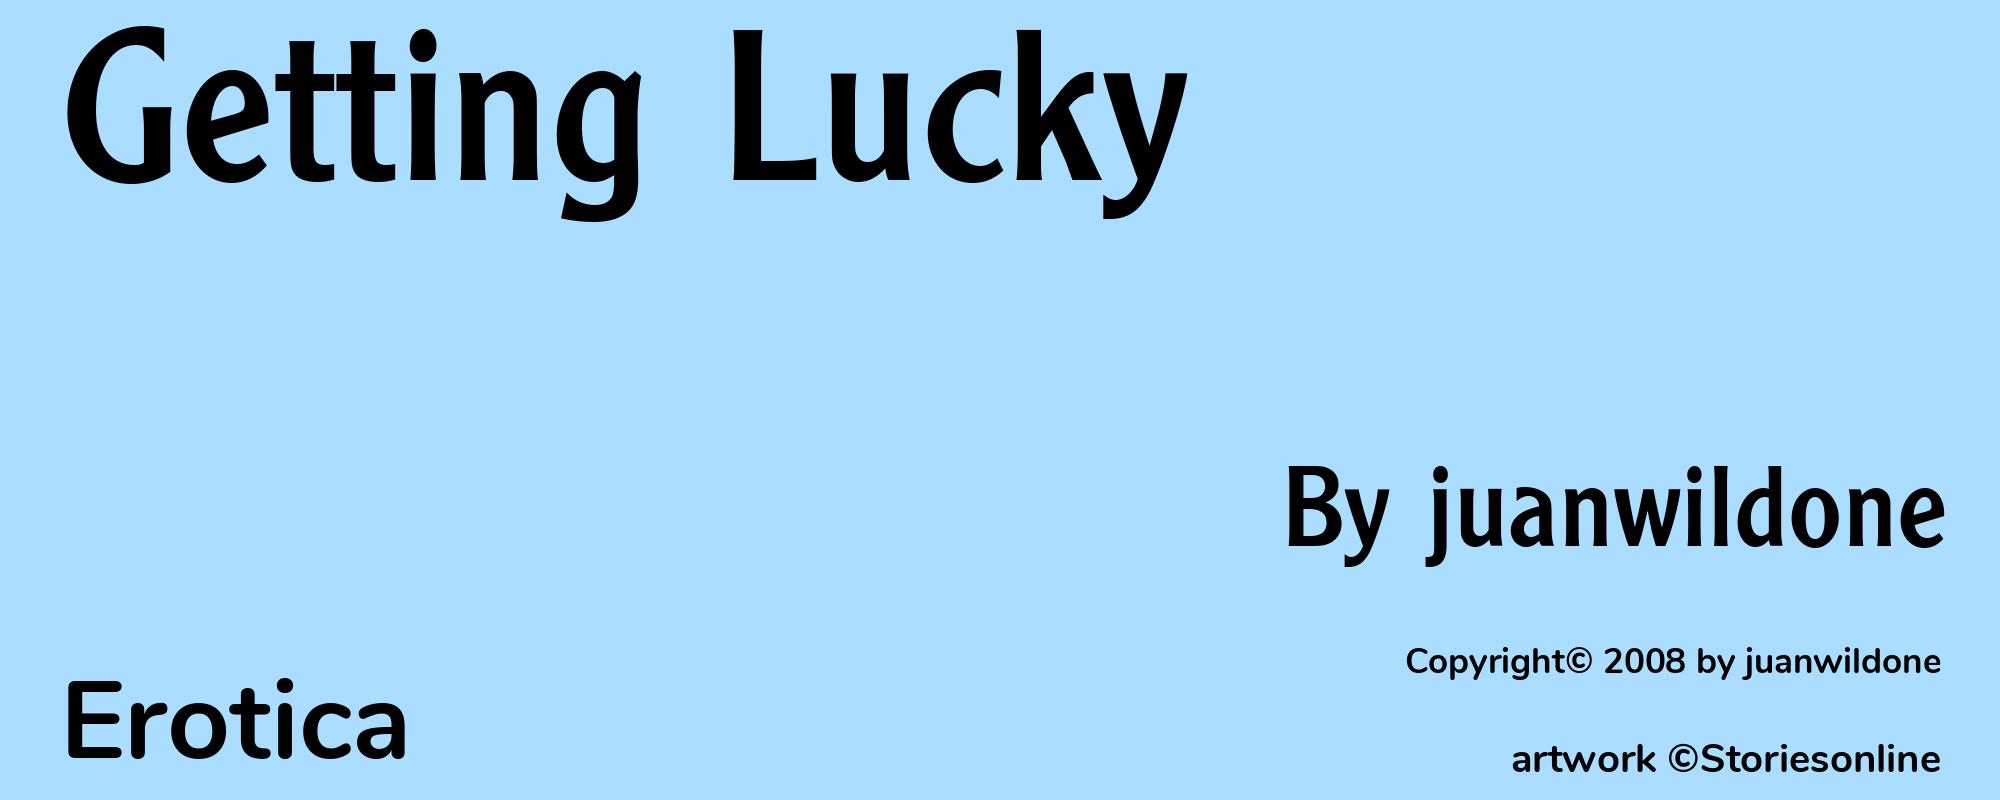 Getting Lucky - Cover